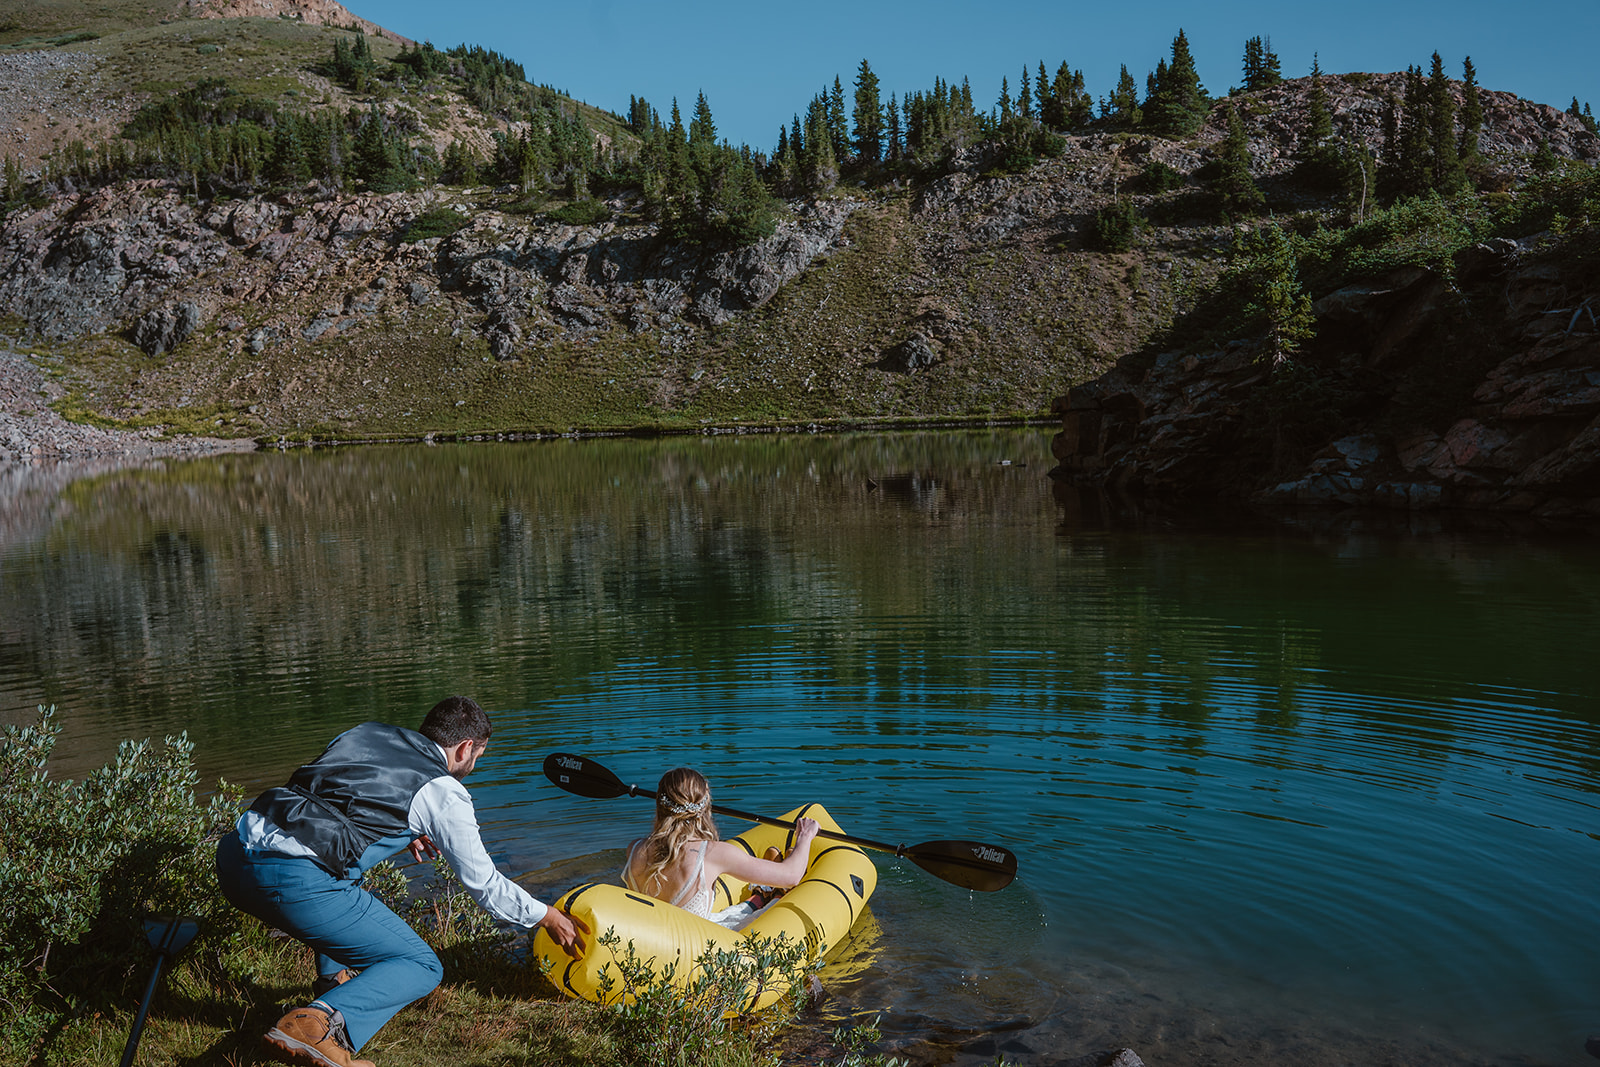 A couple pushes off into a raft during their adventure elopement, a must-consider elopement activity for your elopement day.